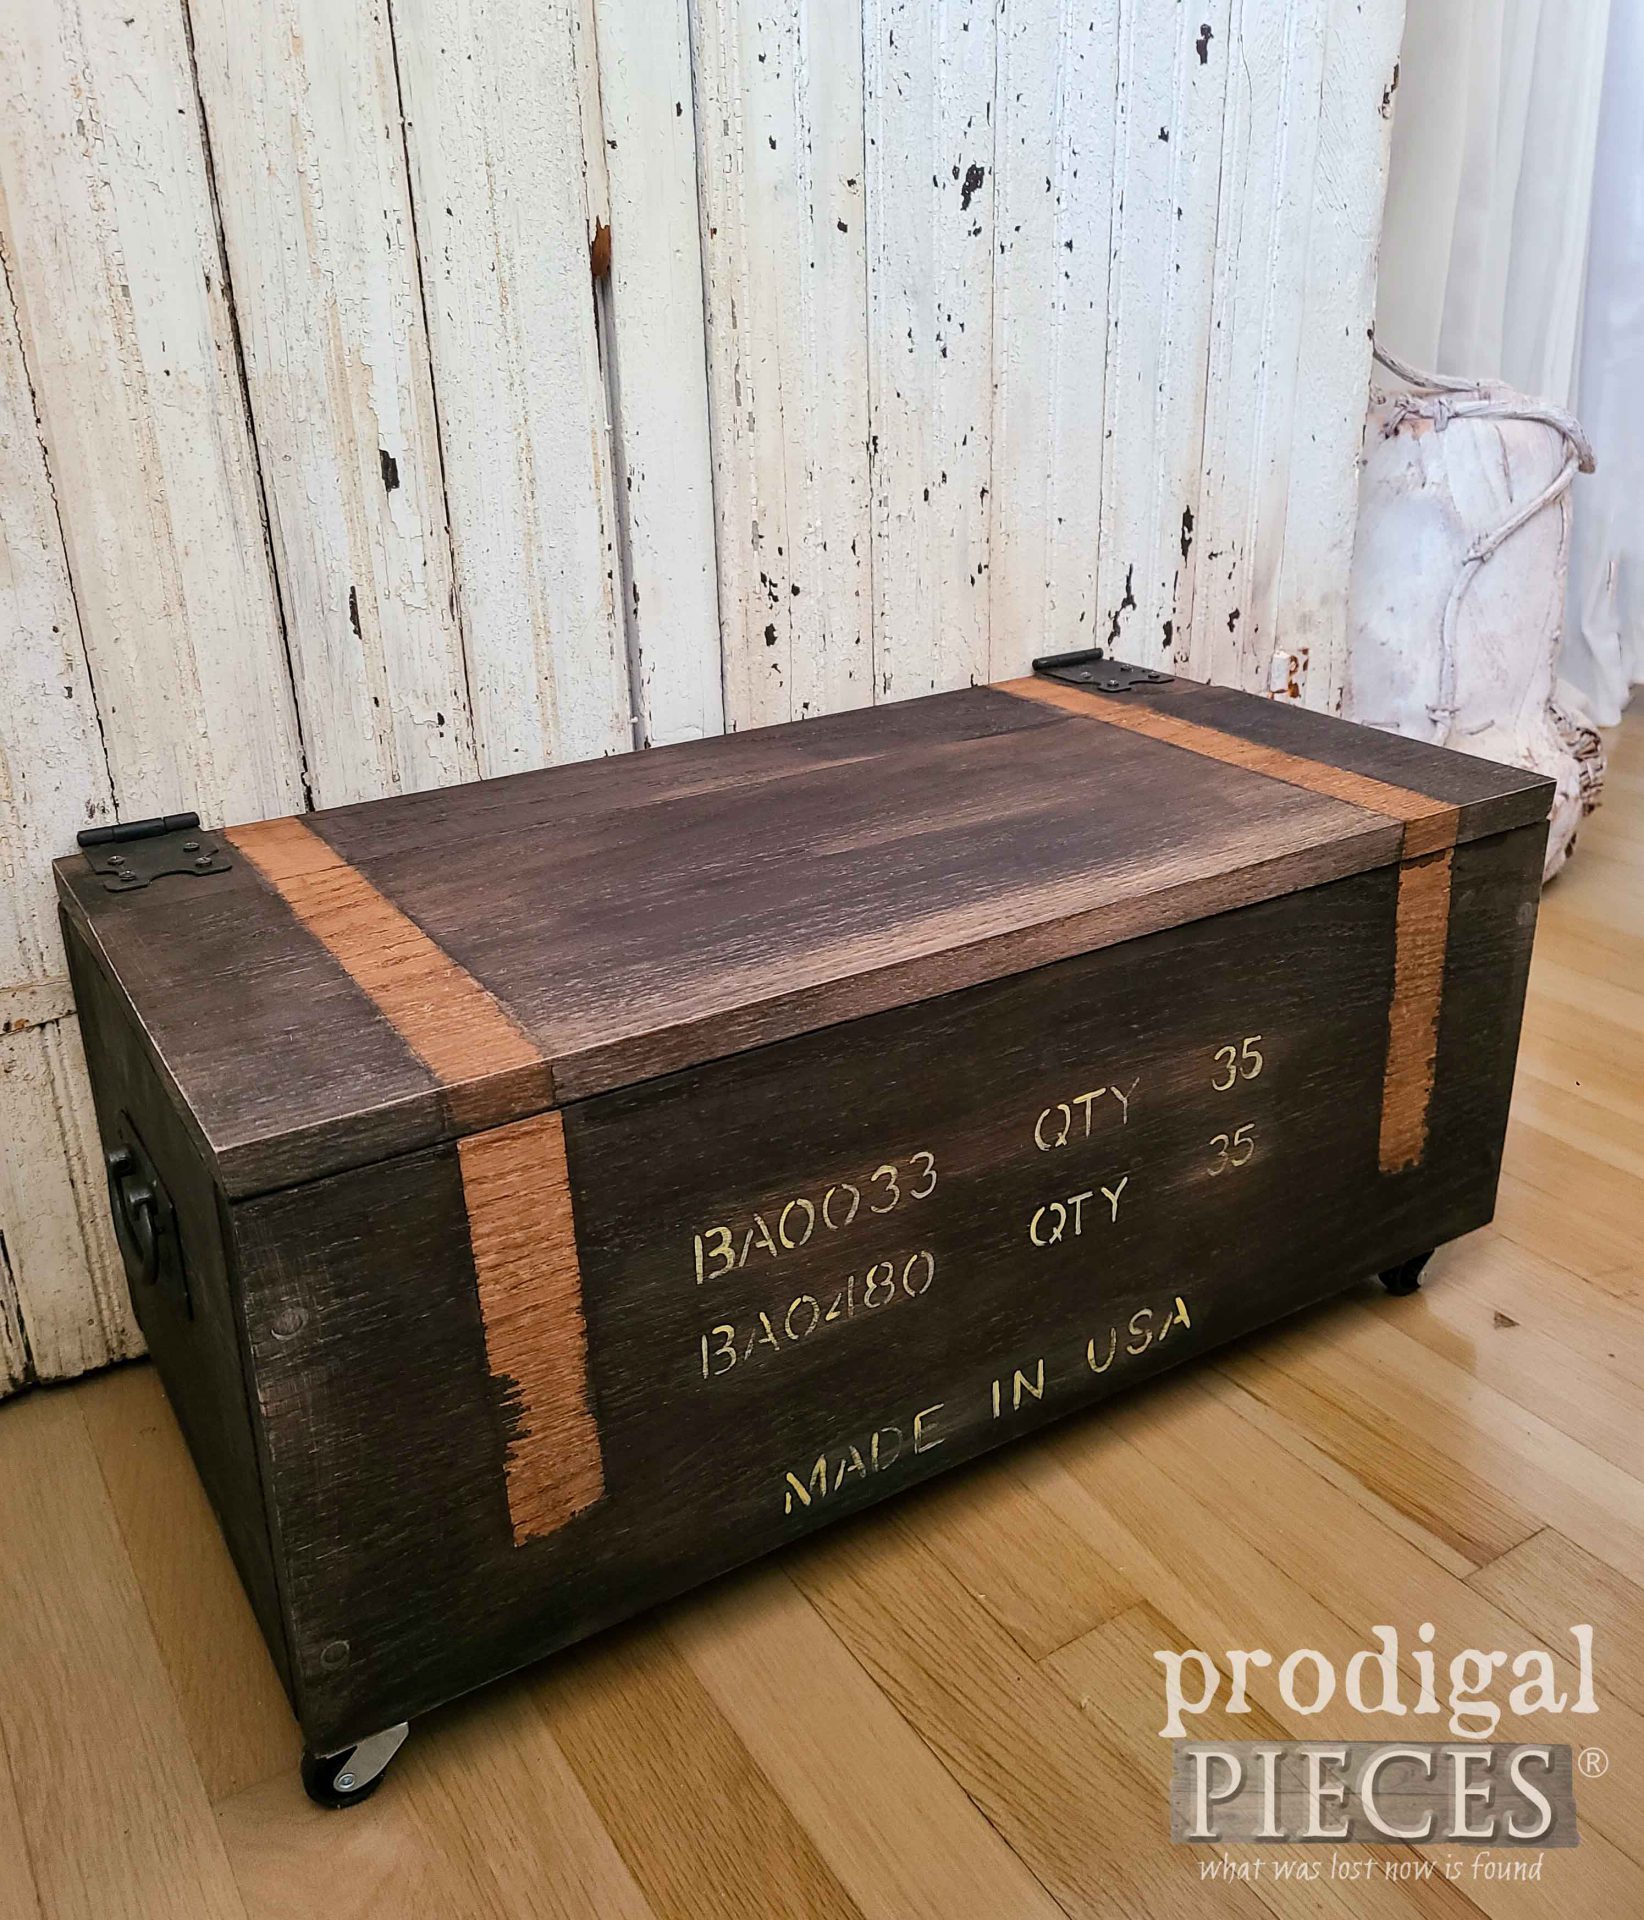 Made in the USA Farmhouse Style Ammo Box by Larissa of Prodigal Pieces | prodigalpieces.com #prodigalpieces #diy #woodworking #farmhouse #home